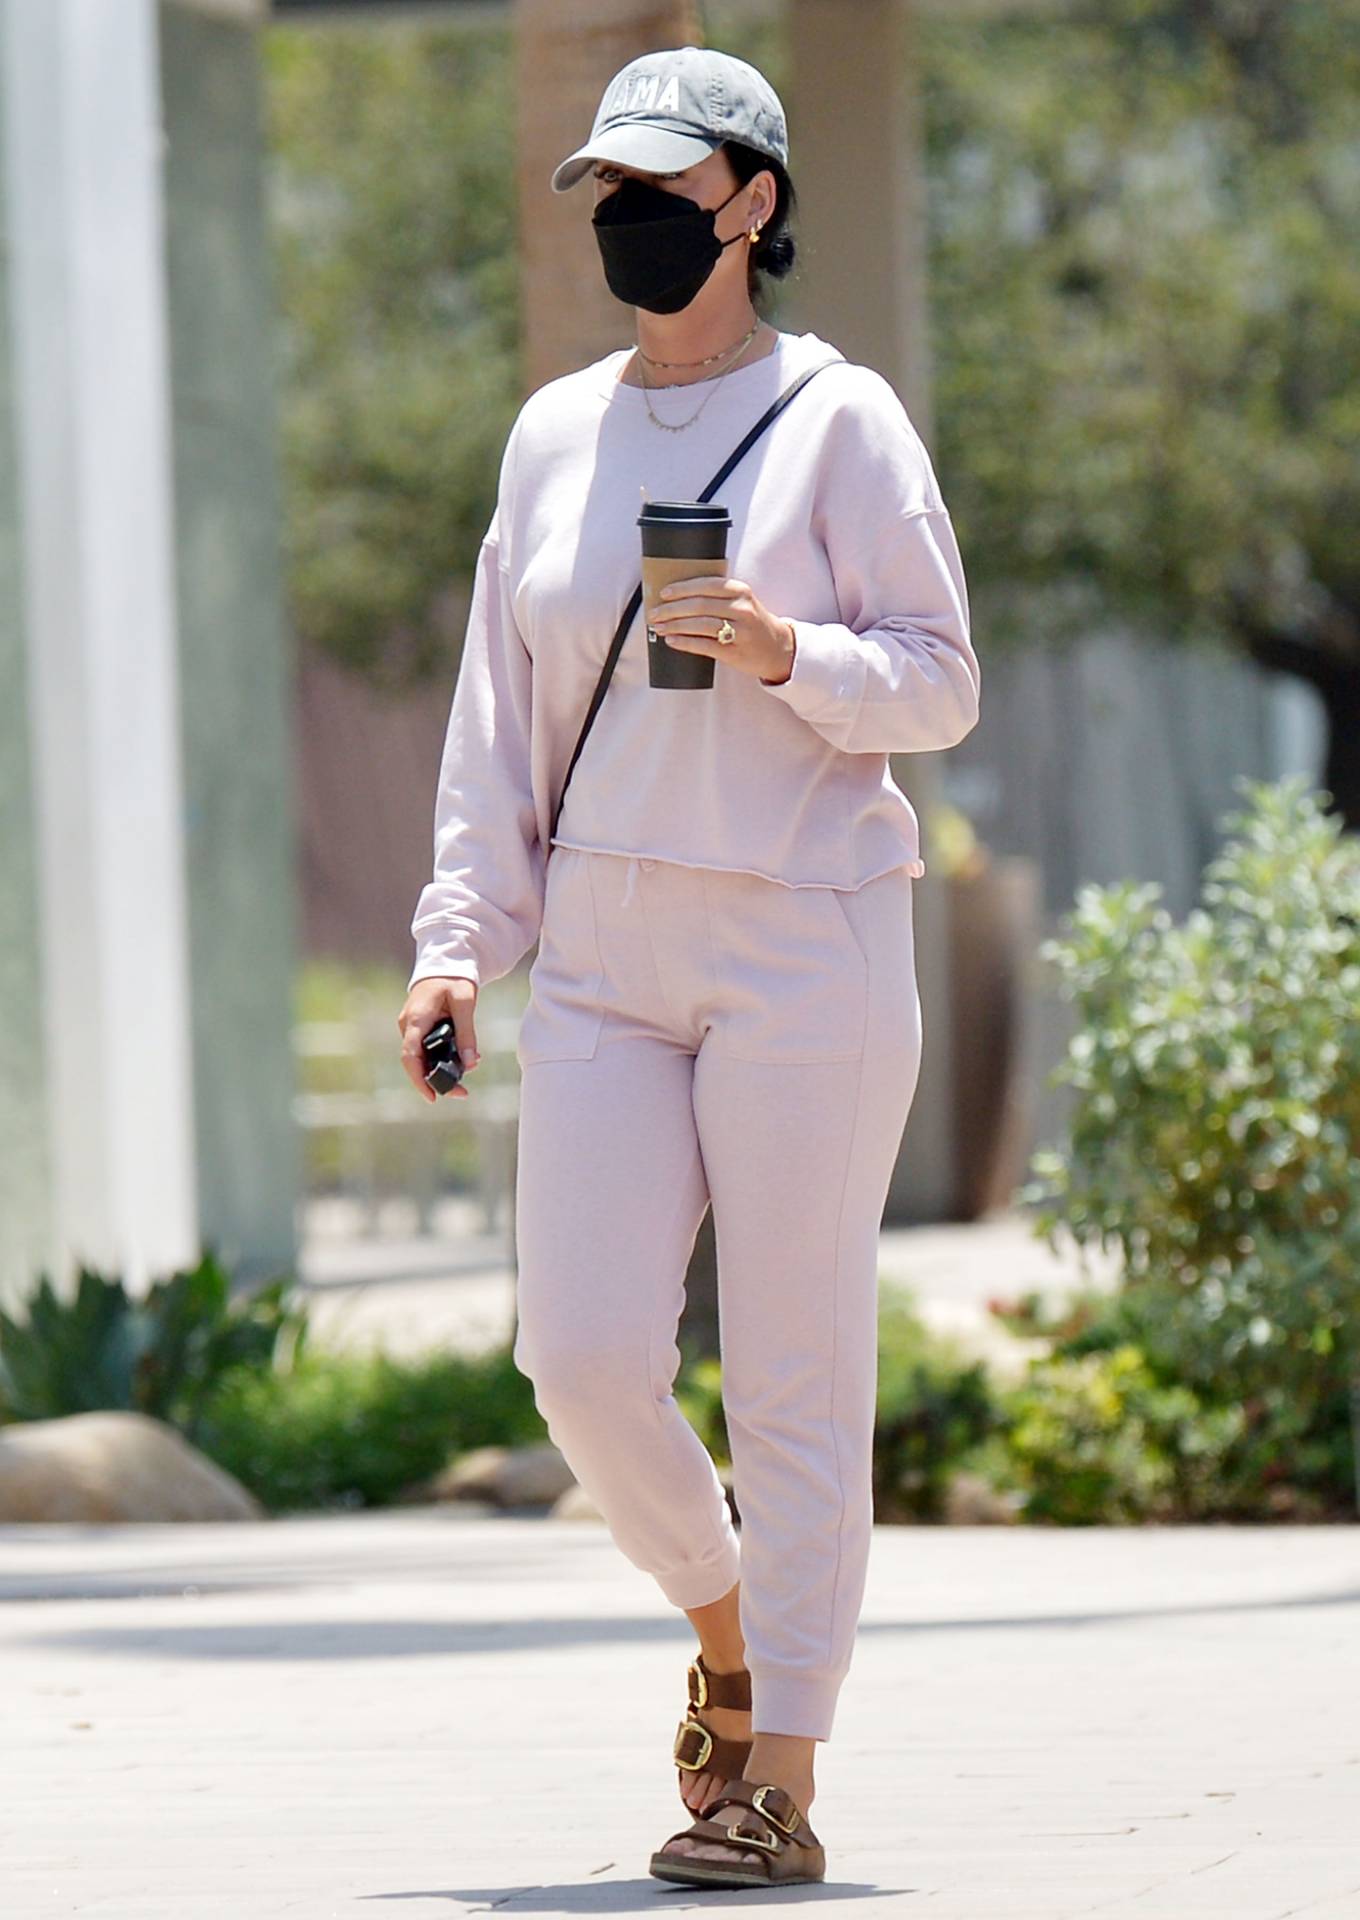 Katy Perry 2022 : Katy Perry – Seen in an all pink sweat suit in Los Angeles-07